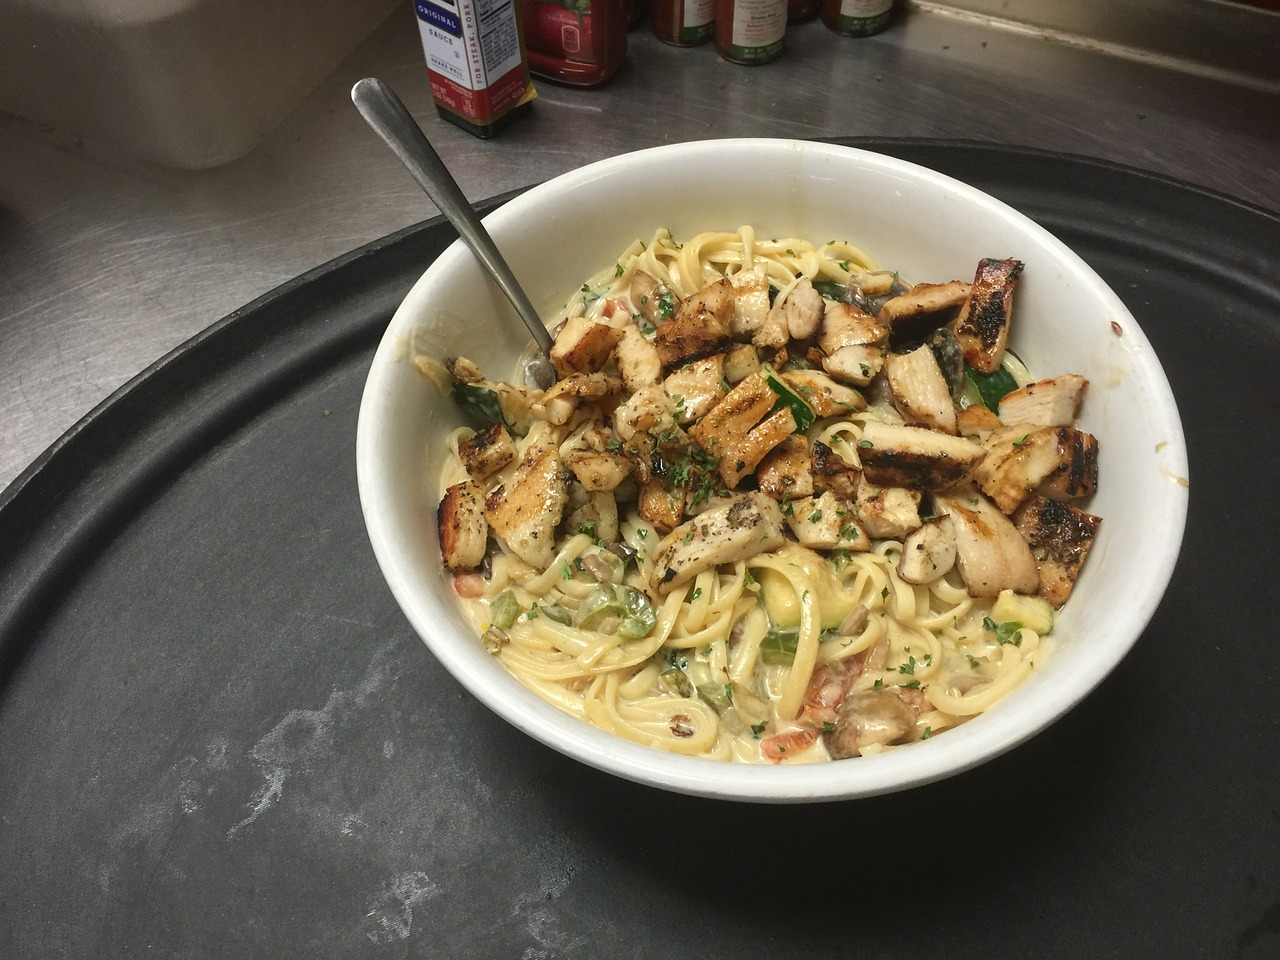 Chicken and Tomato Sauce With Basil and Pine Nuts on Pasta